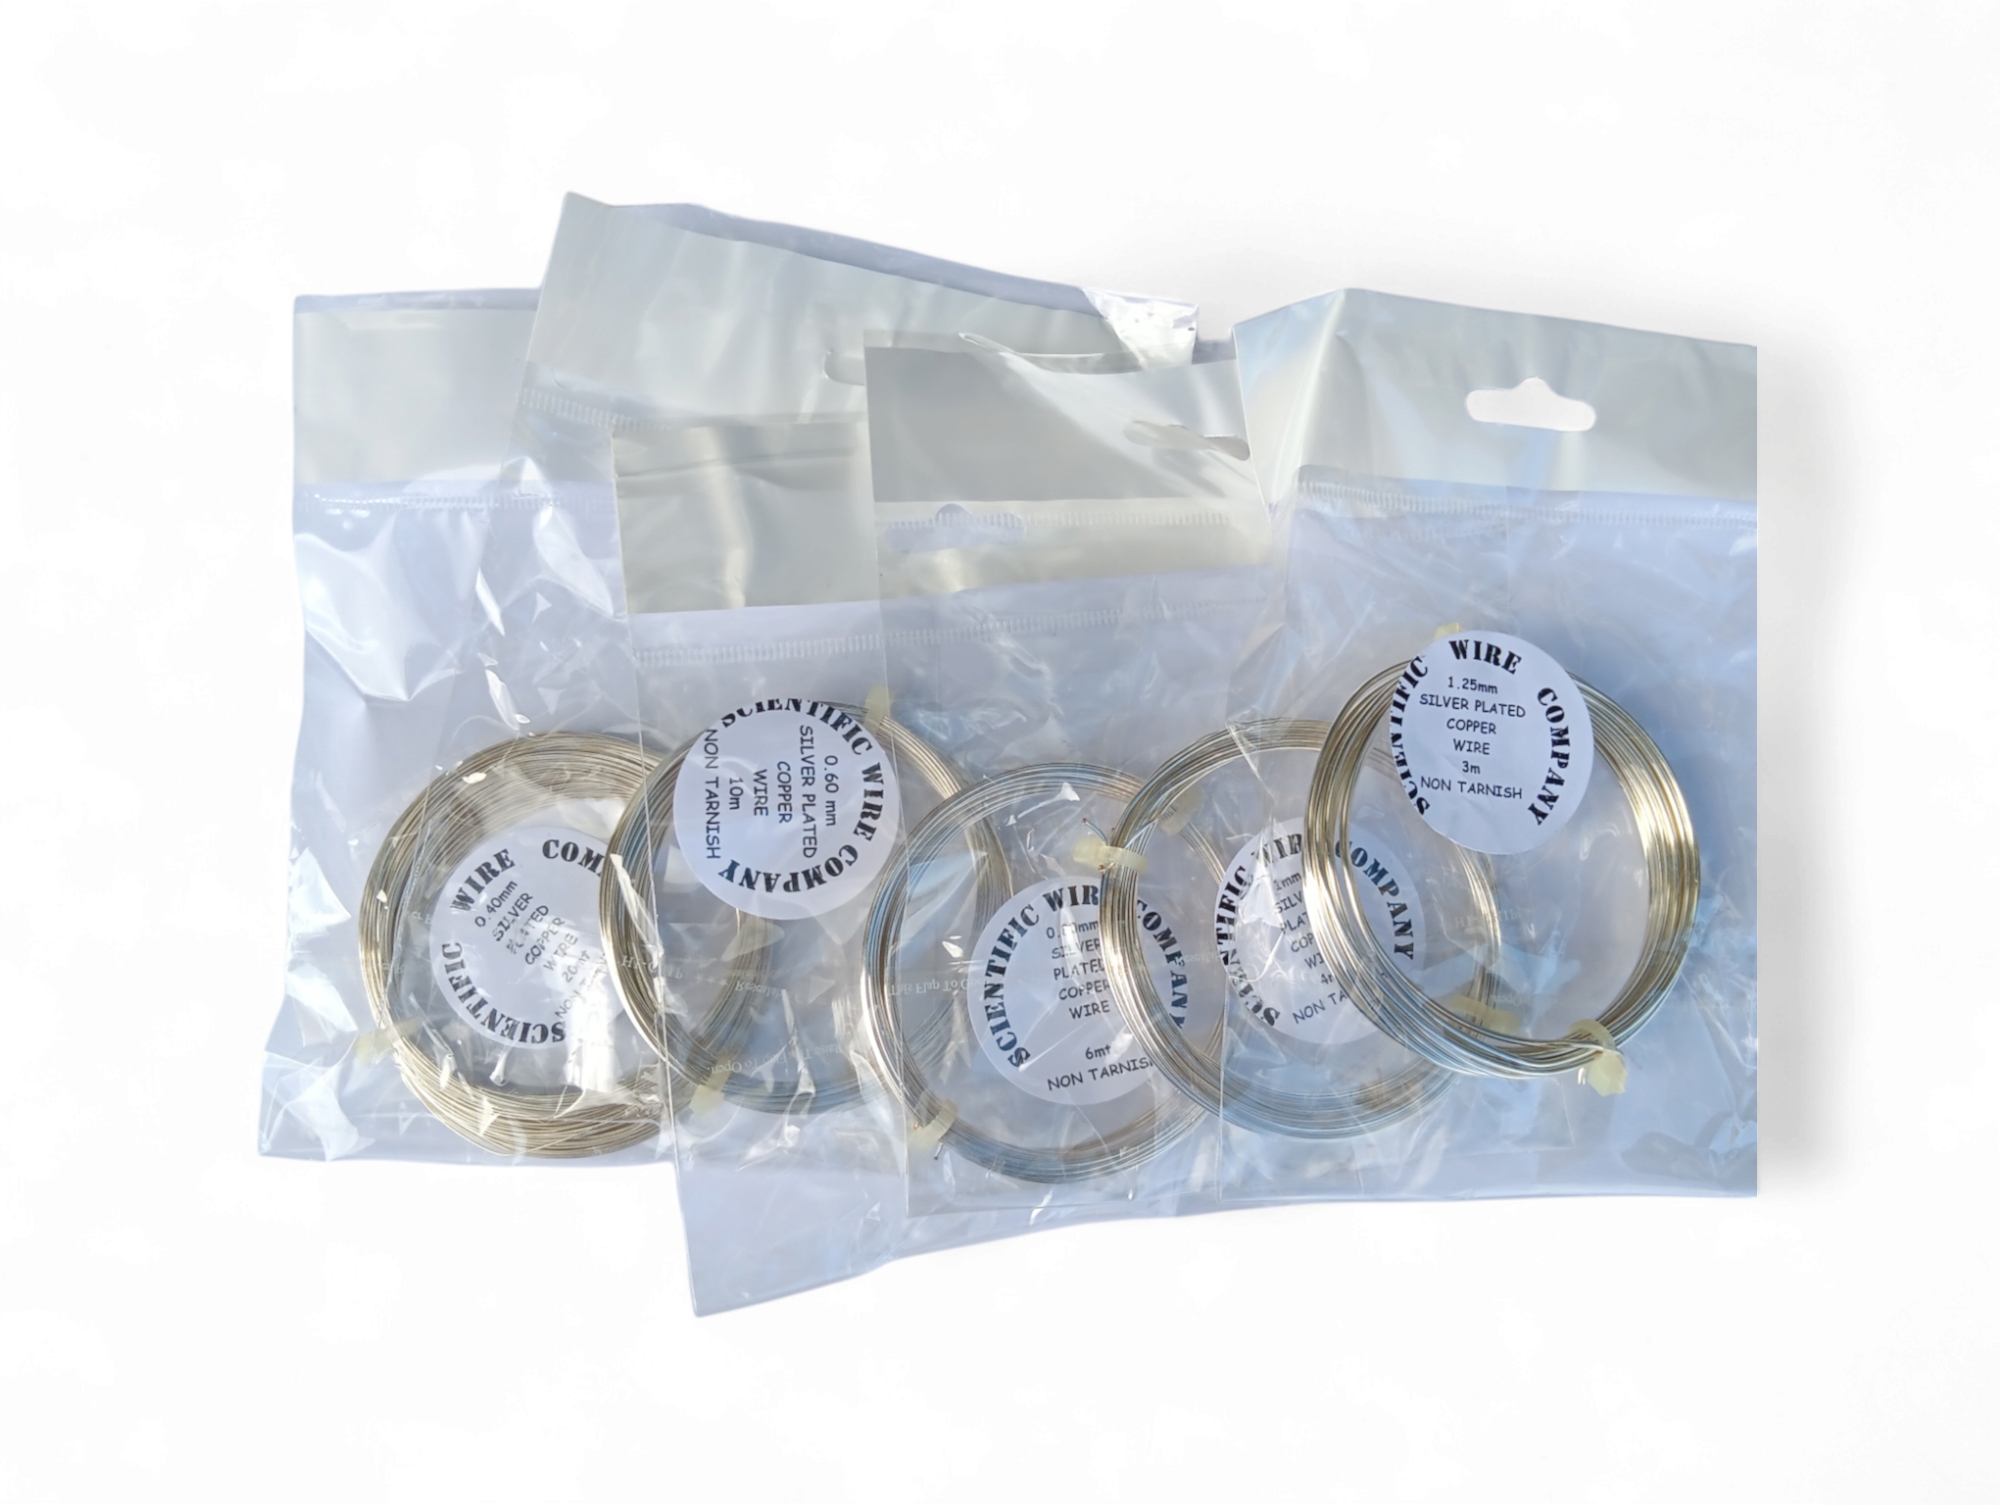 NON TARNISH Silver Plated Craft Wire Sample 5 PACK 0.4mm / 0.6mm / 0.8mm / 1mm / 1.25mm Coils 